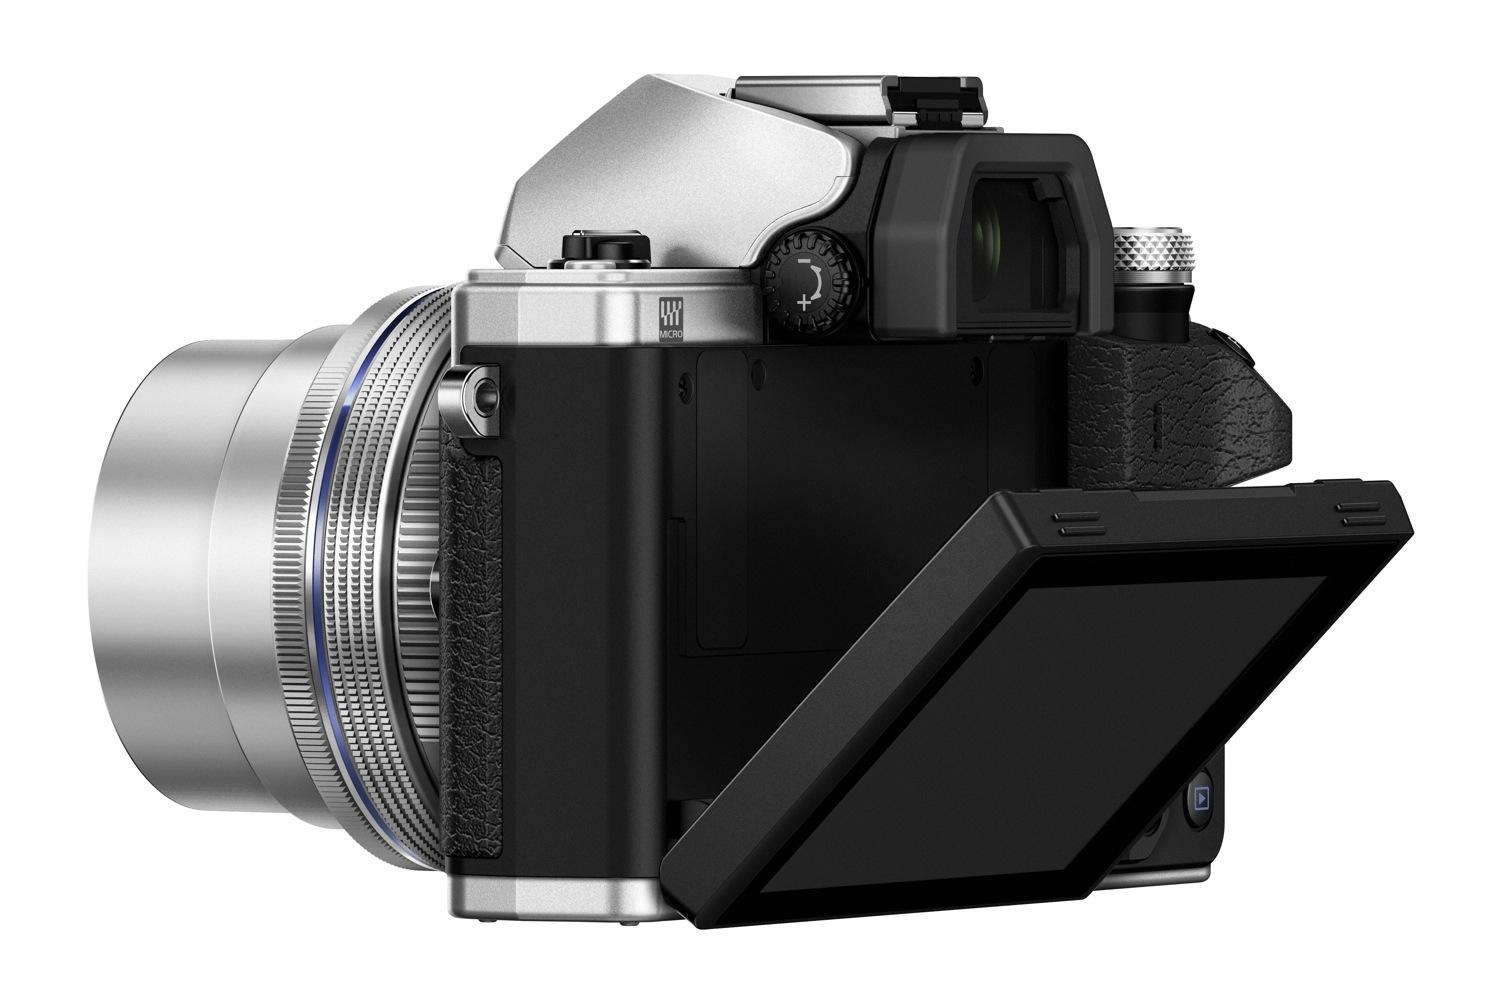 olympus gives entry level om d e m10 mirrorless camera big upgrades e10mkii 10